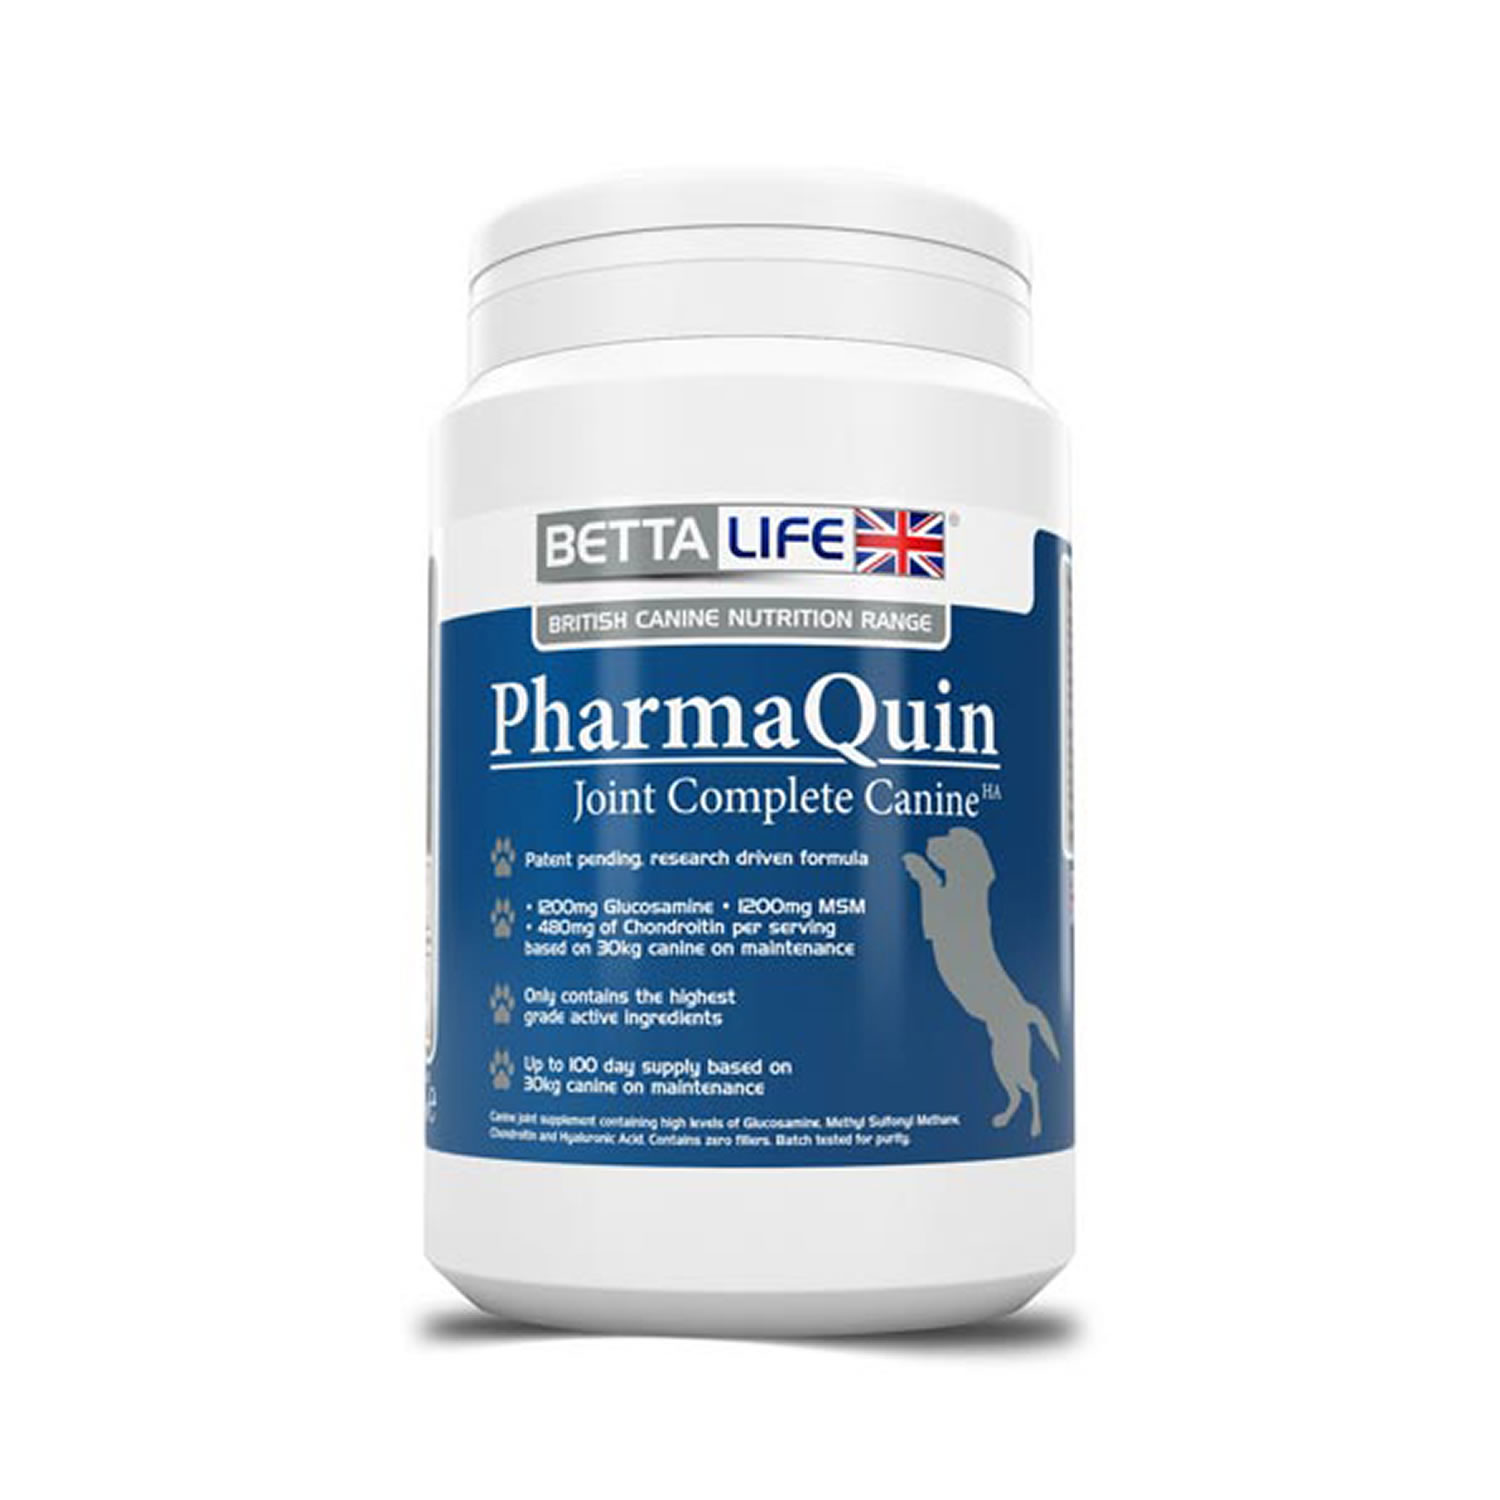 BETTALIFE PHARMAQUIN JOINT COMPLETE HA CANINE 300 GM